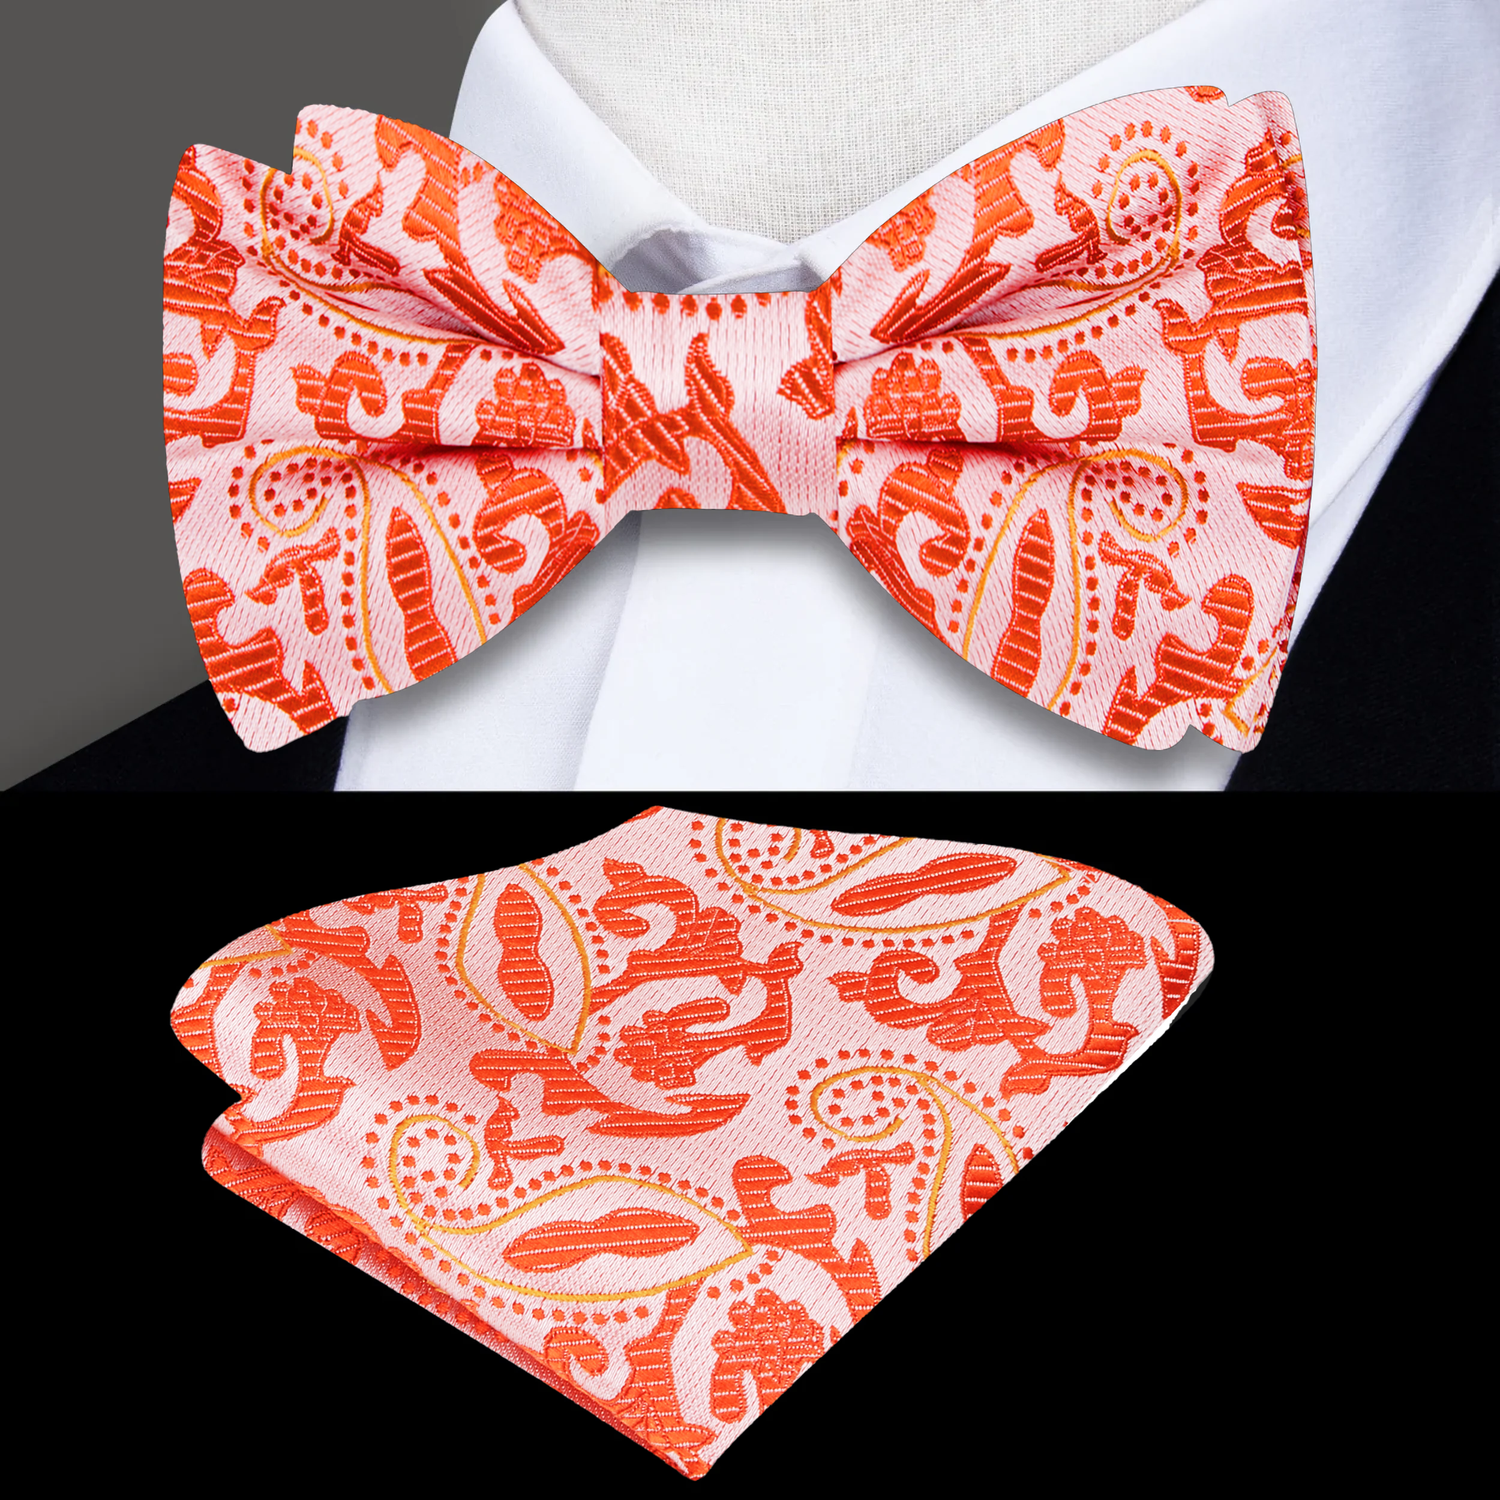 A Coral, Orange Paisley Pattern Silk Bow Tie, Matching Pocket Square